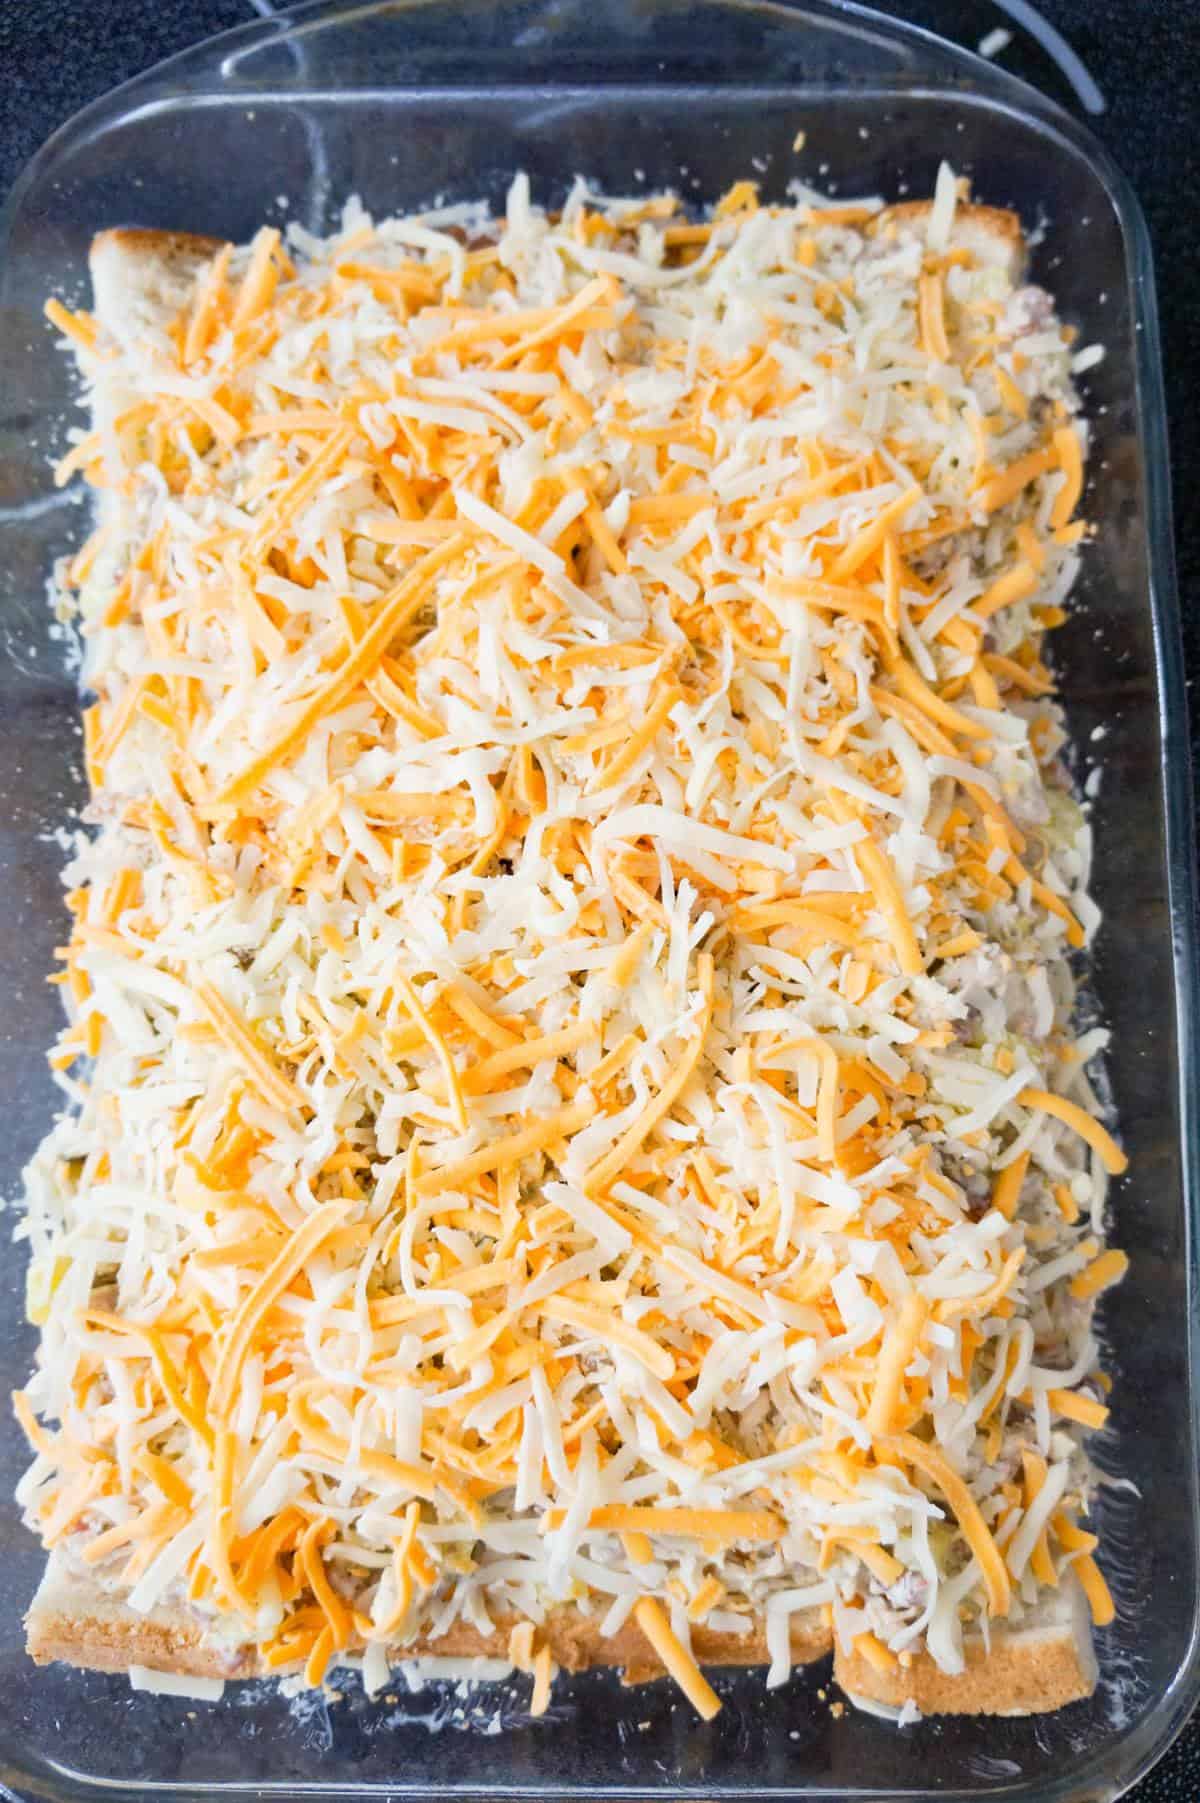 shredded cheese on top of chicken mixture in a baking dish